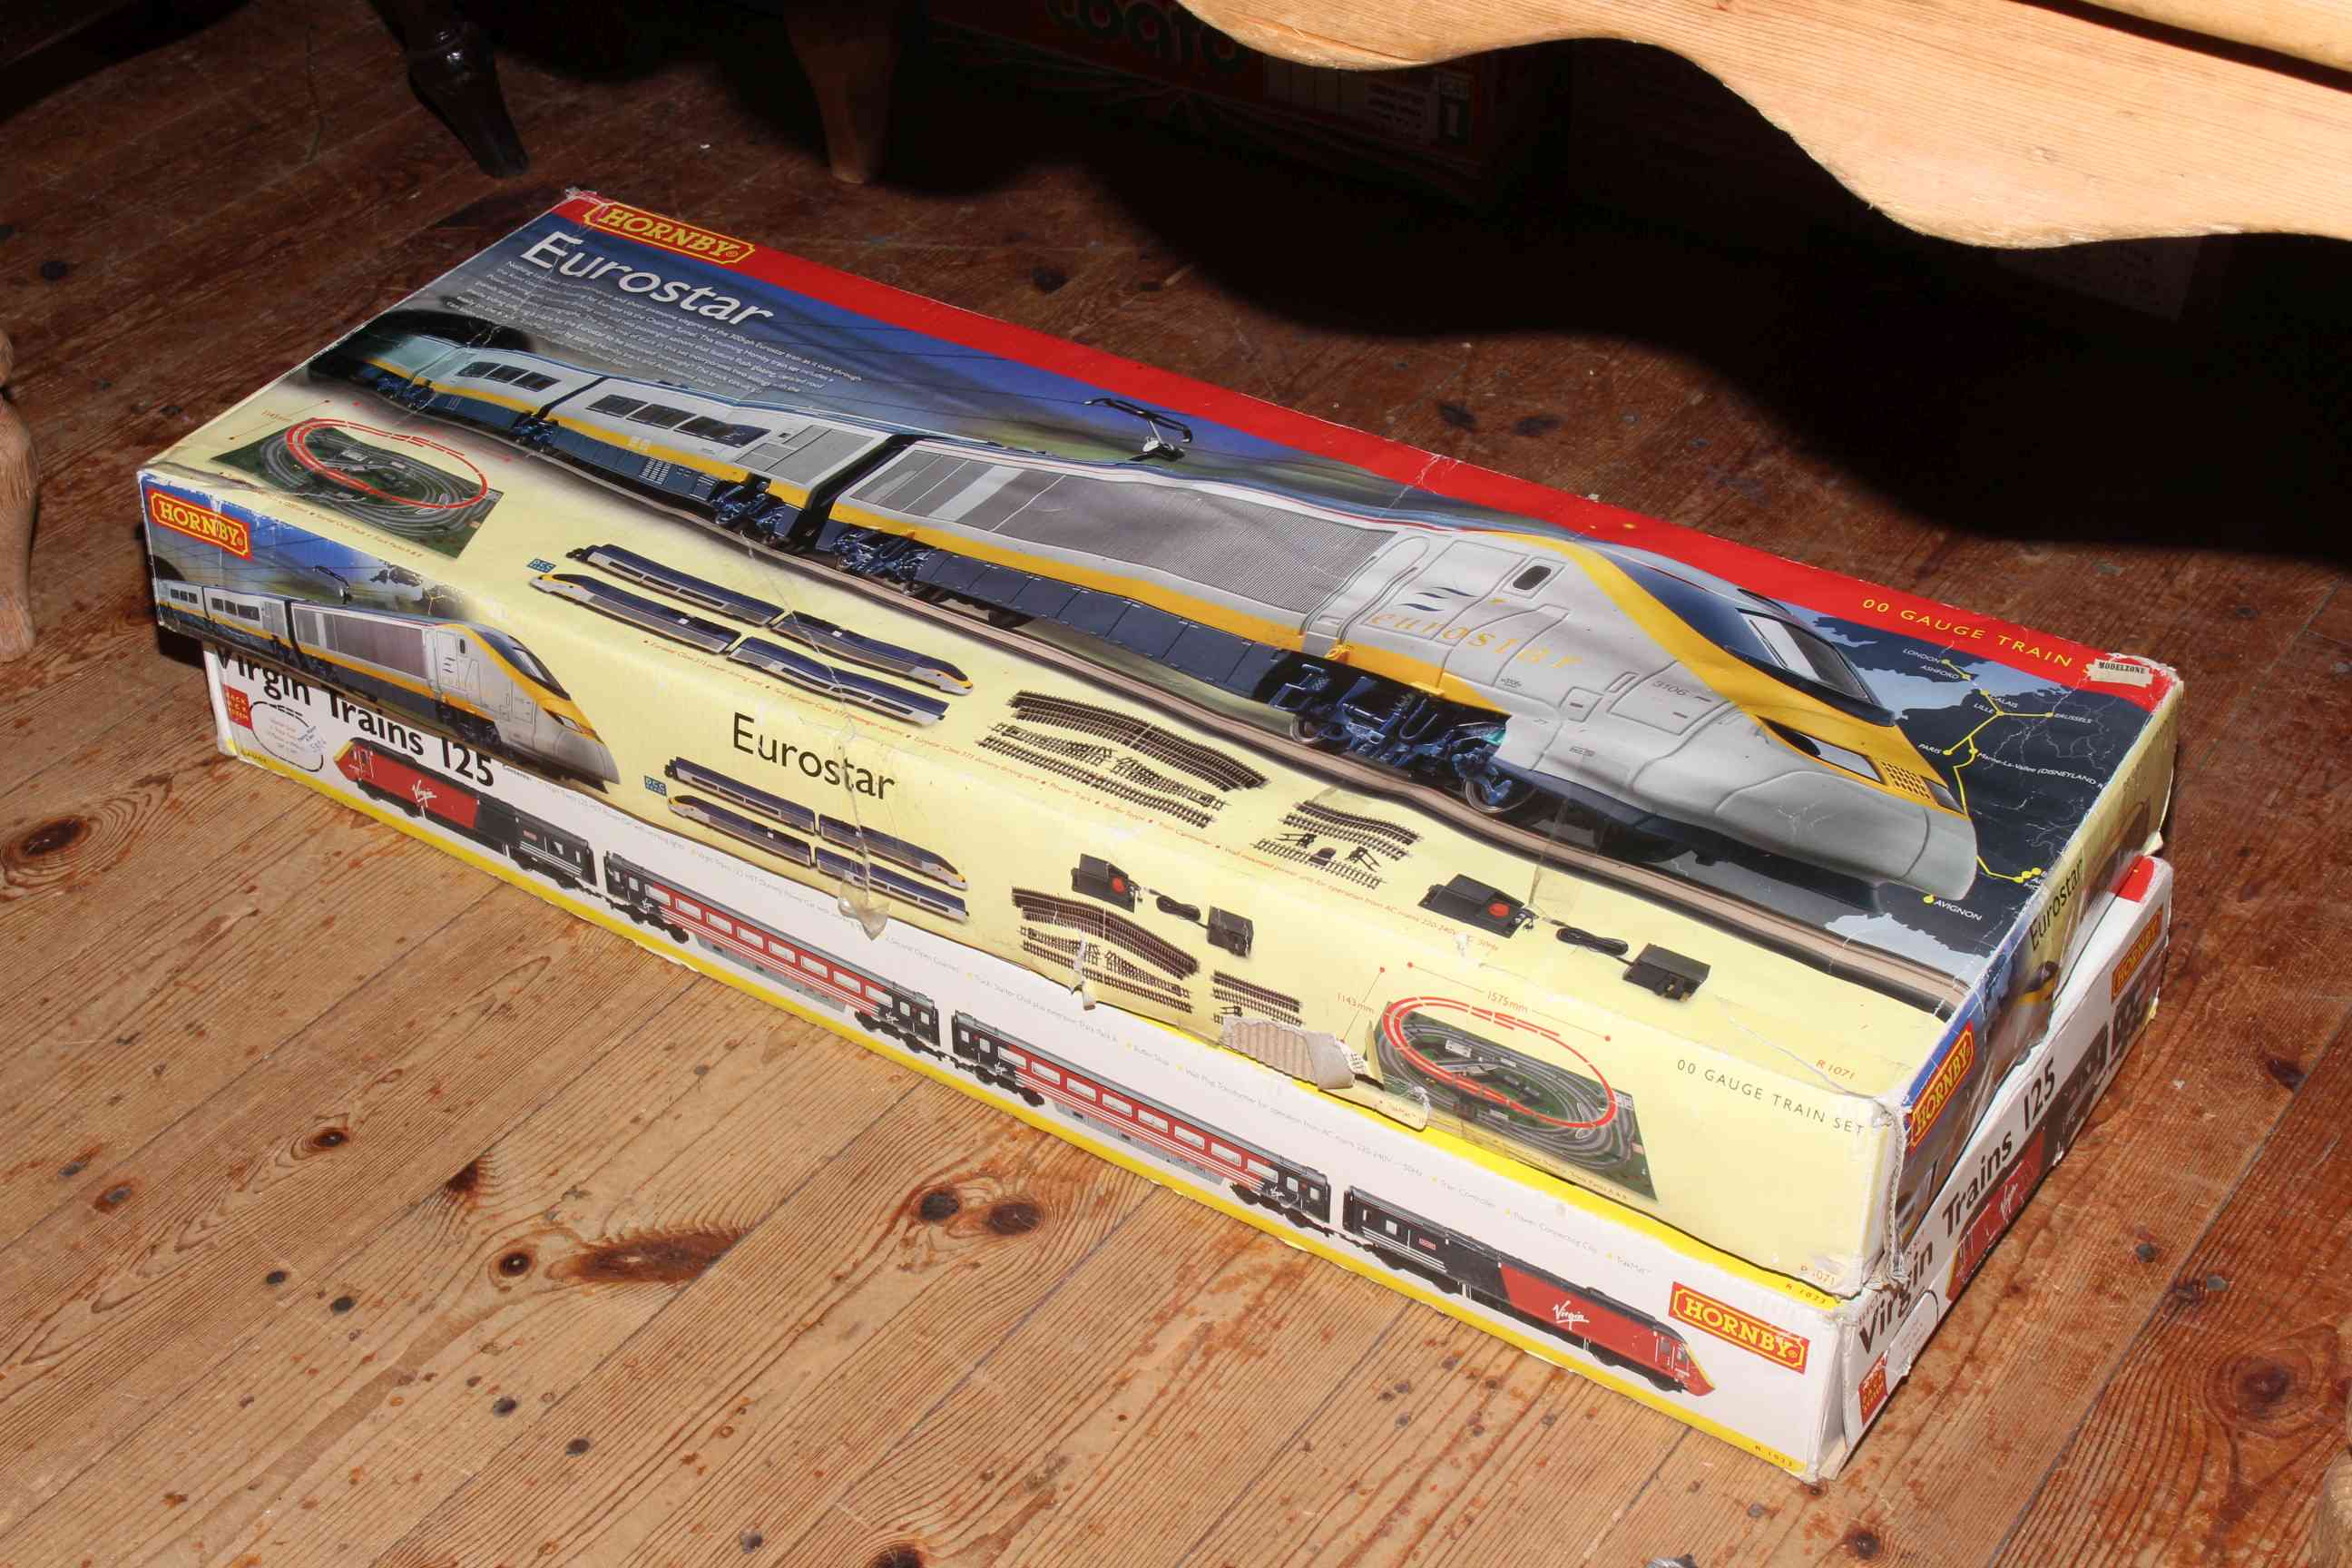 Two boxed modern train sets, Eurostar and Virgin Trains 125.